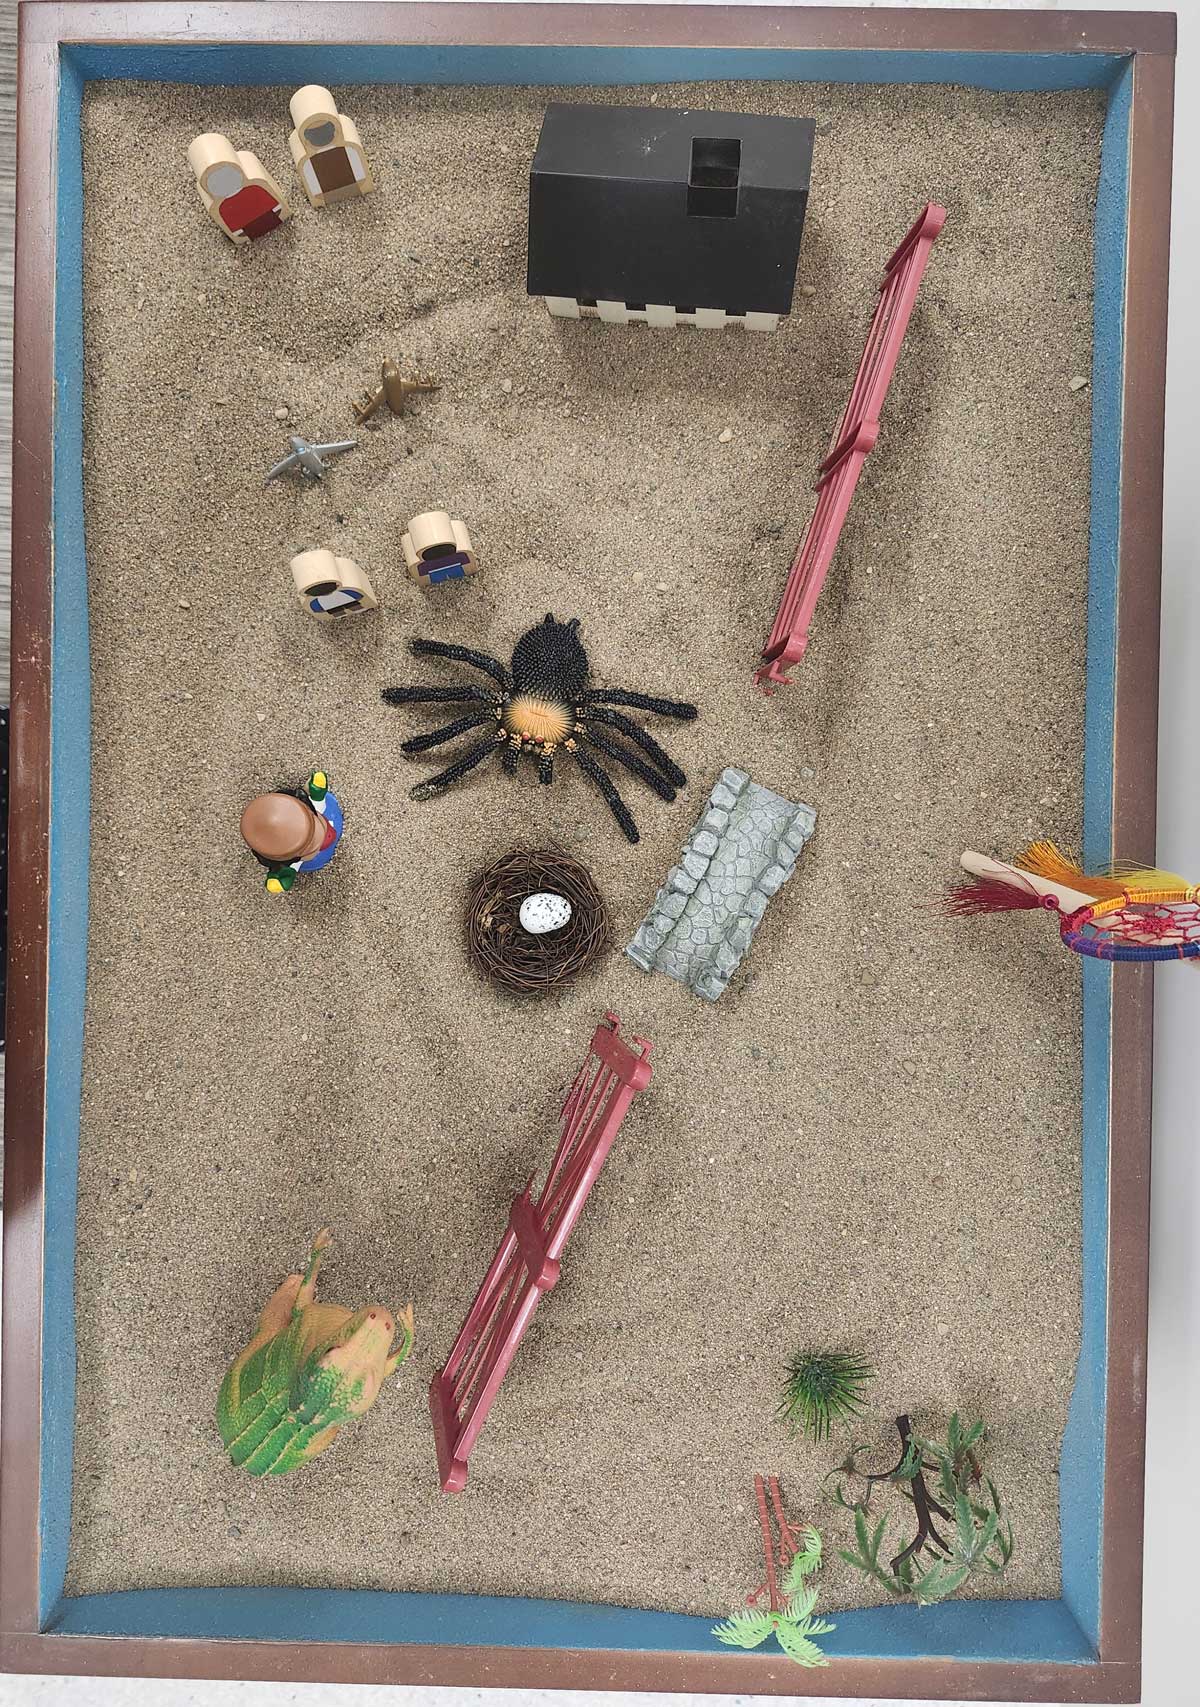 An overhead view of a therapeutic sand tray featuring a mix of miniature objects used for exploring the Third Space.